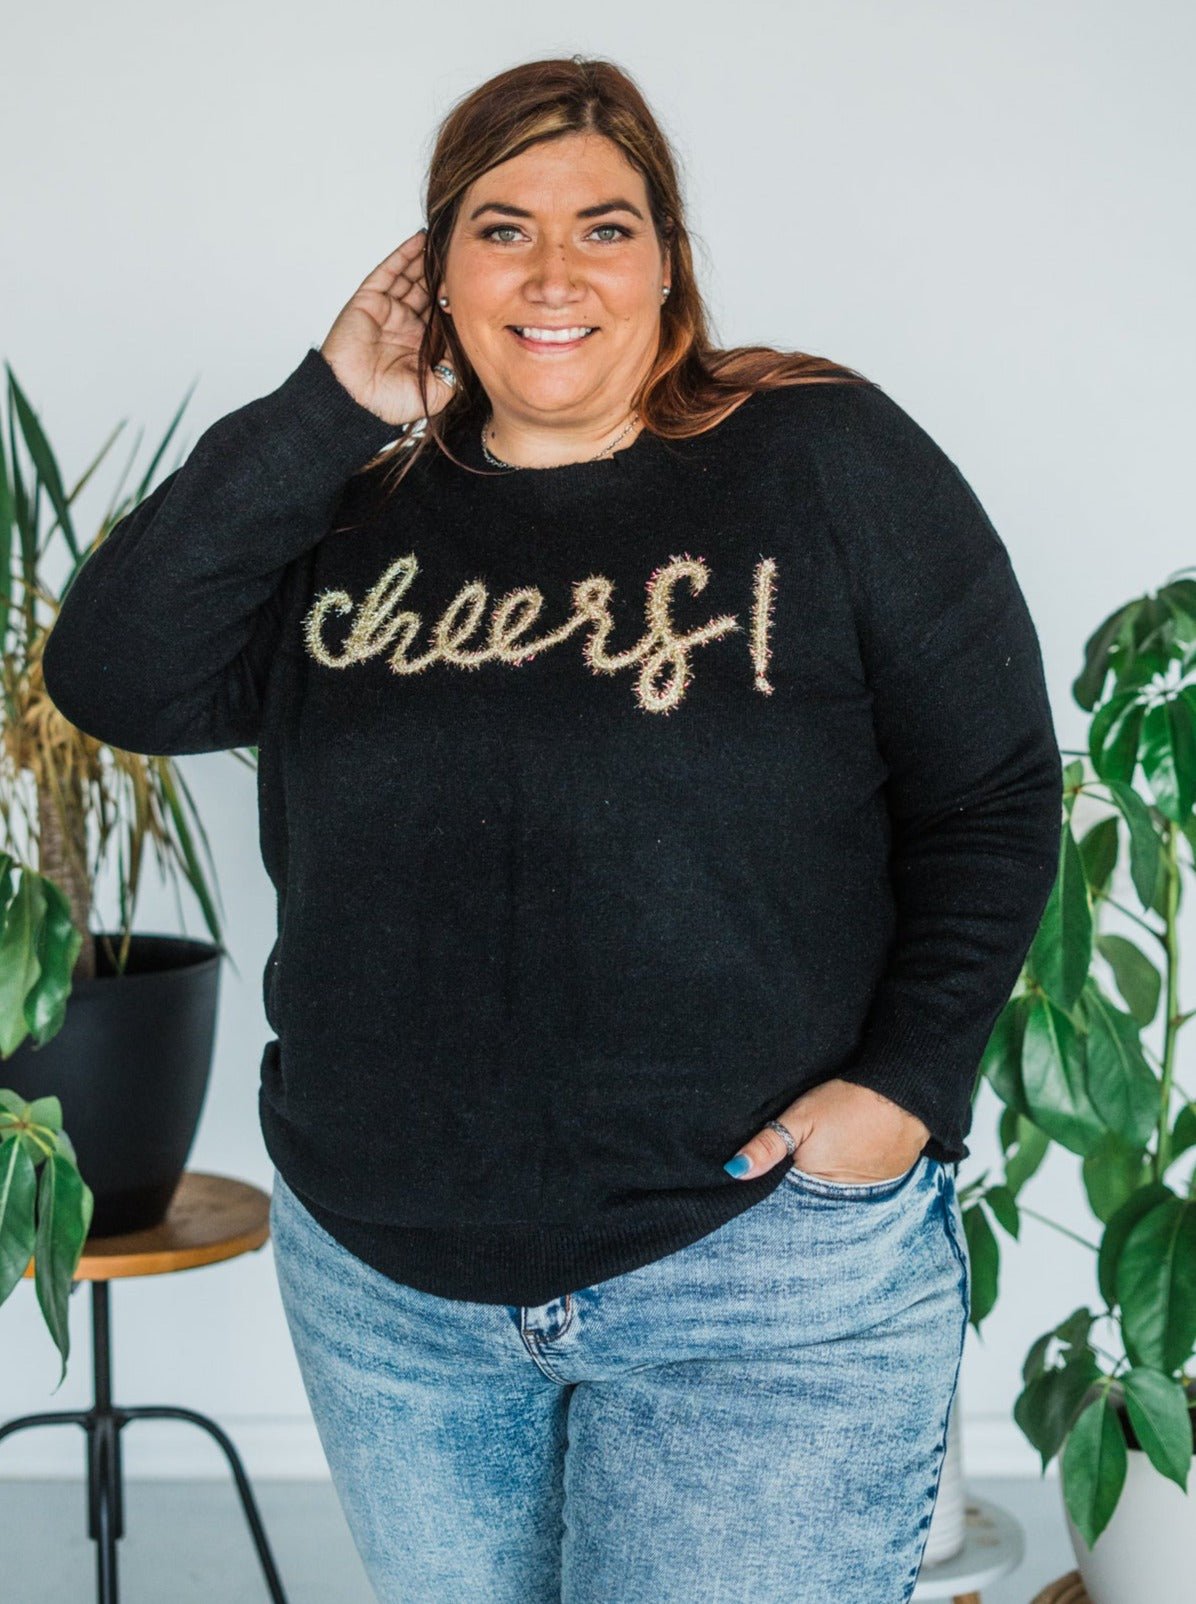 Long Sleeve "Cheers" Black and Gold Pullover Sweater - Whiskey Skies